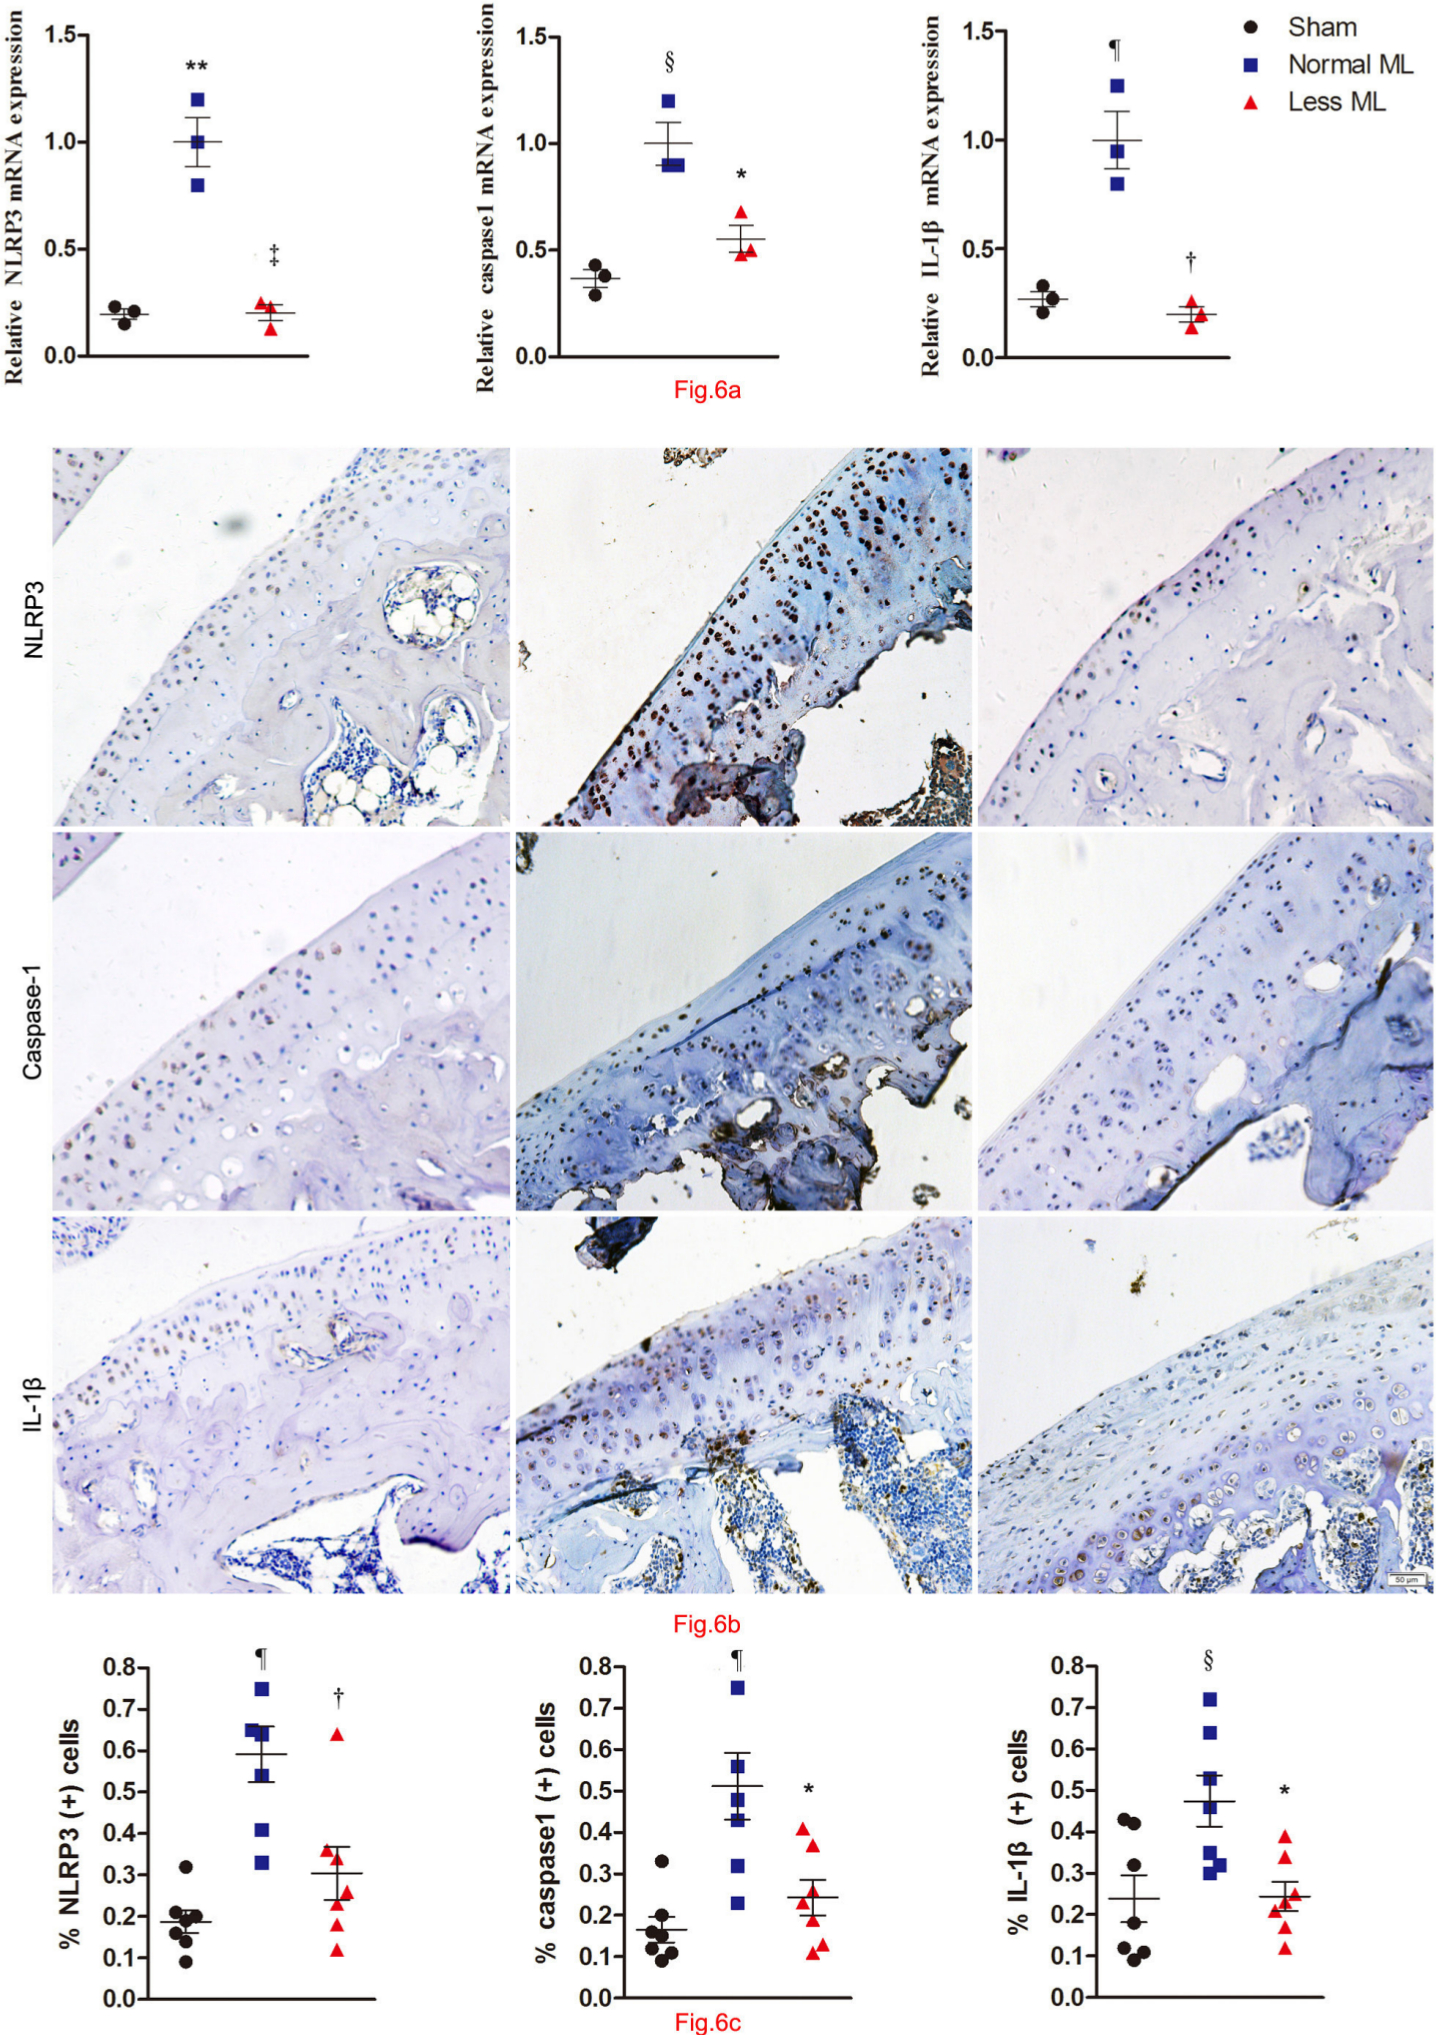 Fig. 6 
            Less mechanical loading (ML) reduced the NACHT, LRR, and PYD domains-containing protein 3 (NLRP3)/caspase 1/interleukin 1β (IL-1β) expression in the cartilage of an osteoarthritis (OA) rat. a) The transcriptional level of NLRP3, caspase-1, and IL-1β was lower in the less ML group than in the normal ML group. b) Furthermore, extensive immunostaining of NLRP3, caspase-1, and IL-1β in normal ML OA cartilage was noted, whereas fewer immune-positive cells could be found in the less ML OA cartilage. The presentative images were selected from weight-bearing area of tibial cartilage. c) The percentage of immunopositive cells of NLRP3, caspase-1, and IL-1β in the less ML group was significantly lower than that of the normal ML group. Scale bar: 50 μm. Values are presented as mean standard error of the mean (SEM). One-way analysis of variance (ANOVA) was used, *p < 0.05; †p < 0.01; ‡p < 0.001, between OA rats with normal and less ML. §p < 0.05; ¶p < 0.01; **p < 0.001, between sham controls and OA rats with normal ML. Magnification in Fig. 6b: 200×.
          